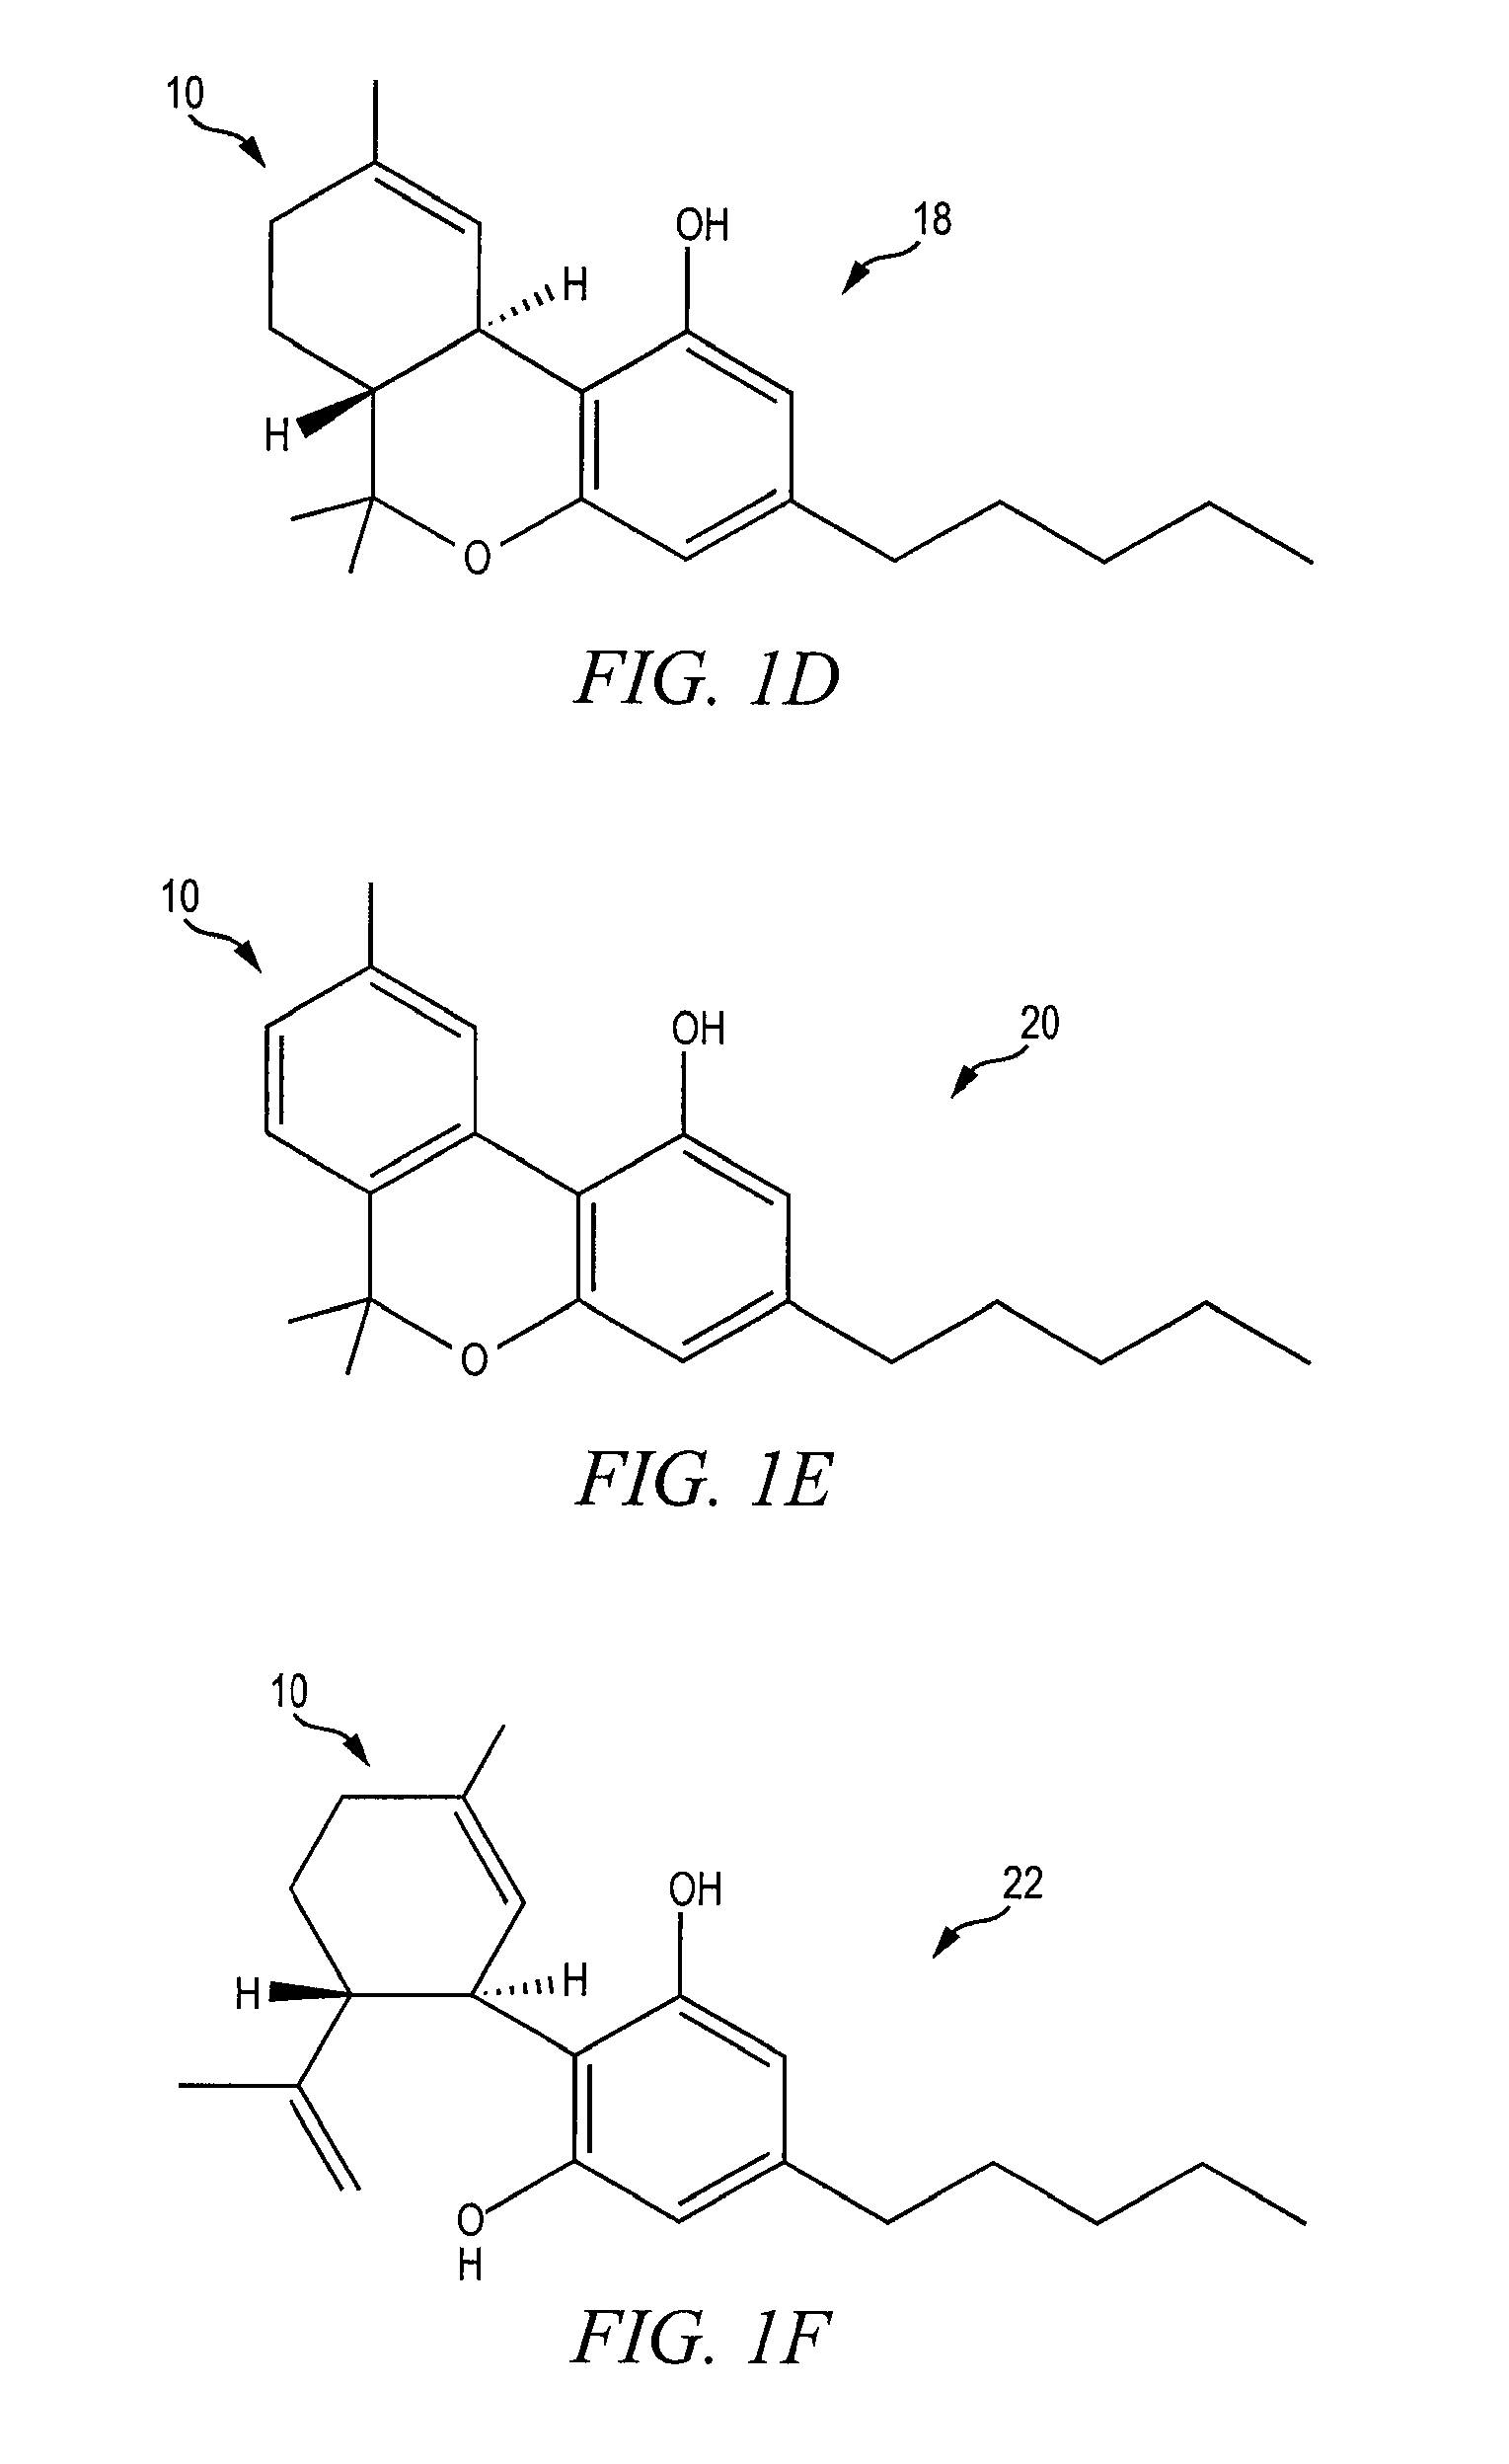 System and Method of Reducing Impairment of Alertness, Concentration, Motivation, and Creativity Caused by Medication